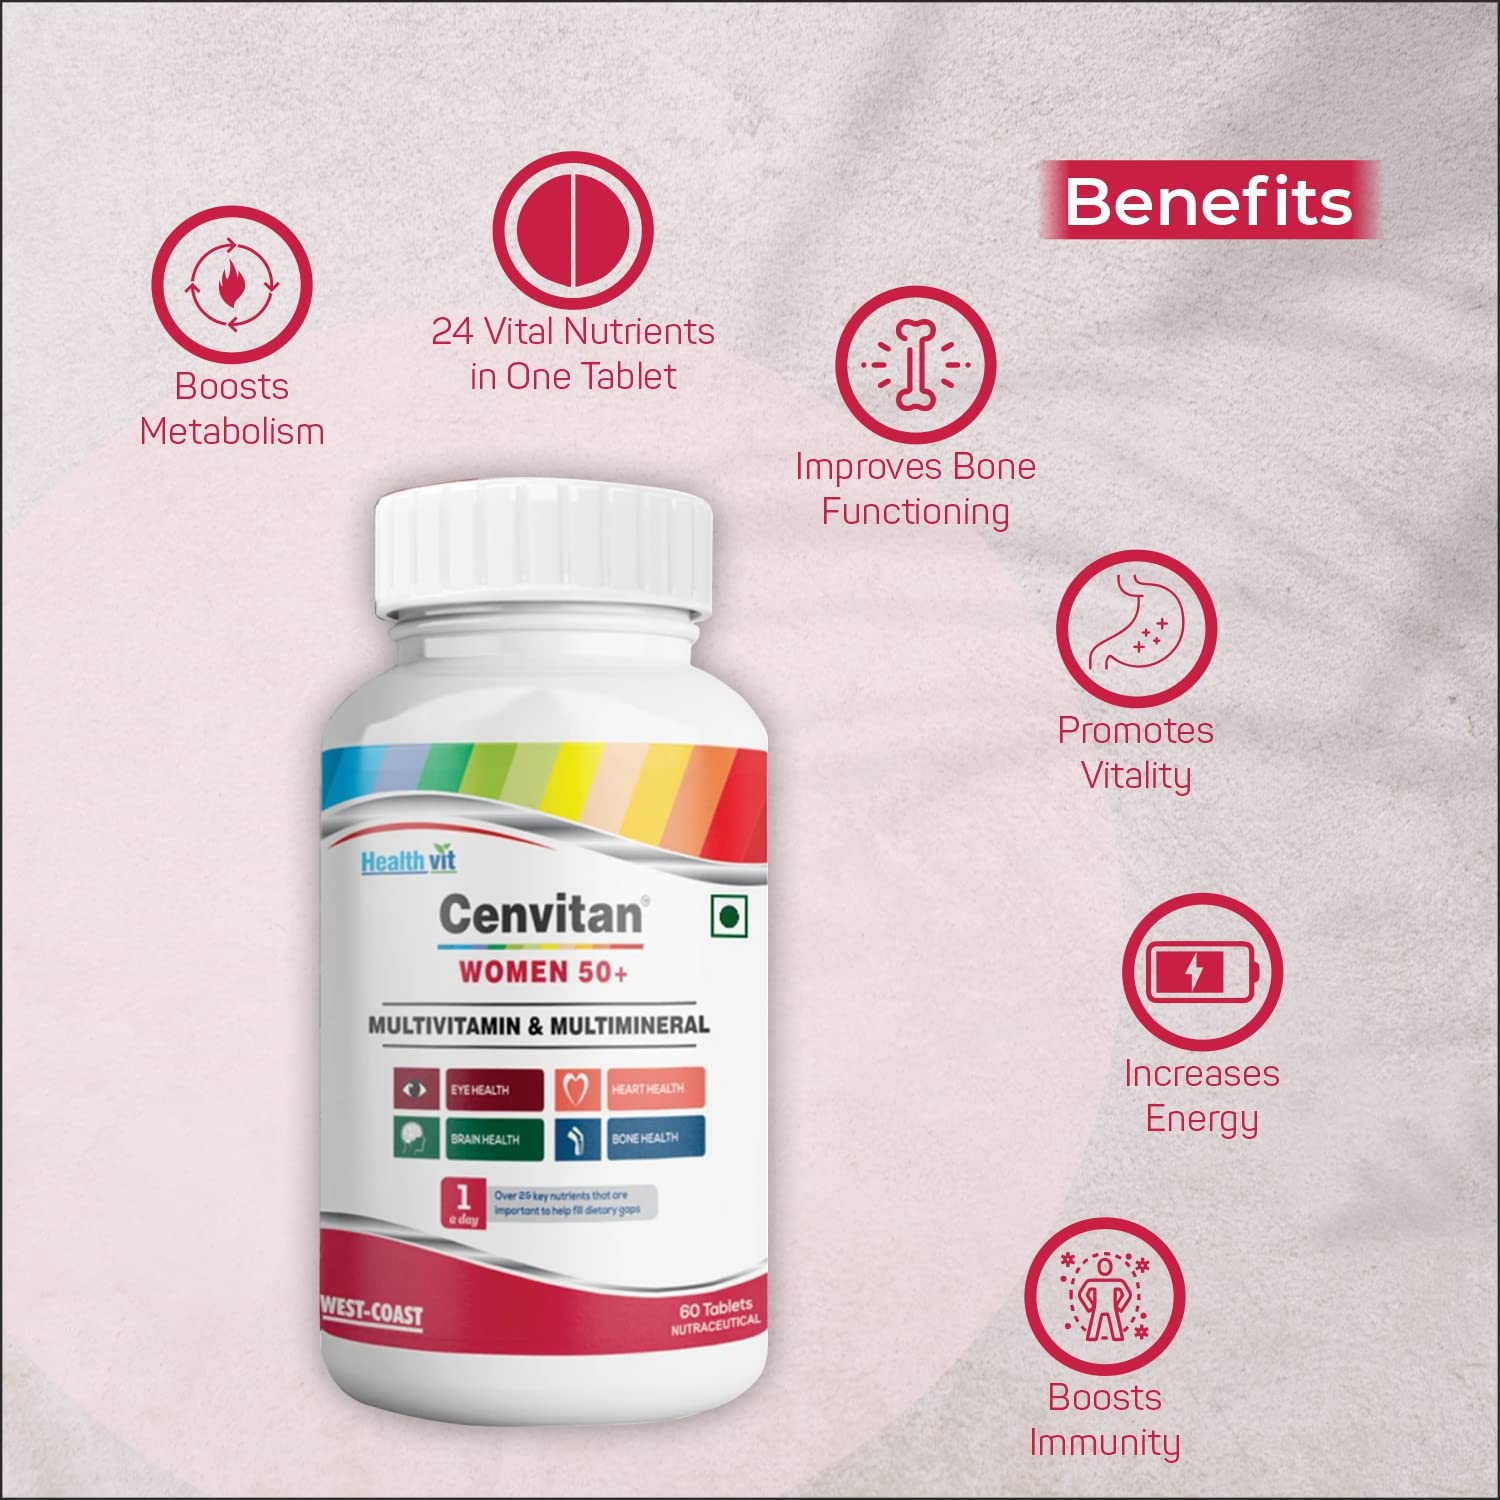 Healthvit Cenvitan Women 50+ Multivitamins and Multimineral 25 Nutrients (Vitamins and Minerals) | Eye Health, Brain Health, Bone Health and Heart Health– 60 Tablets (Pack of 2)